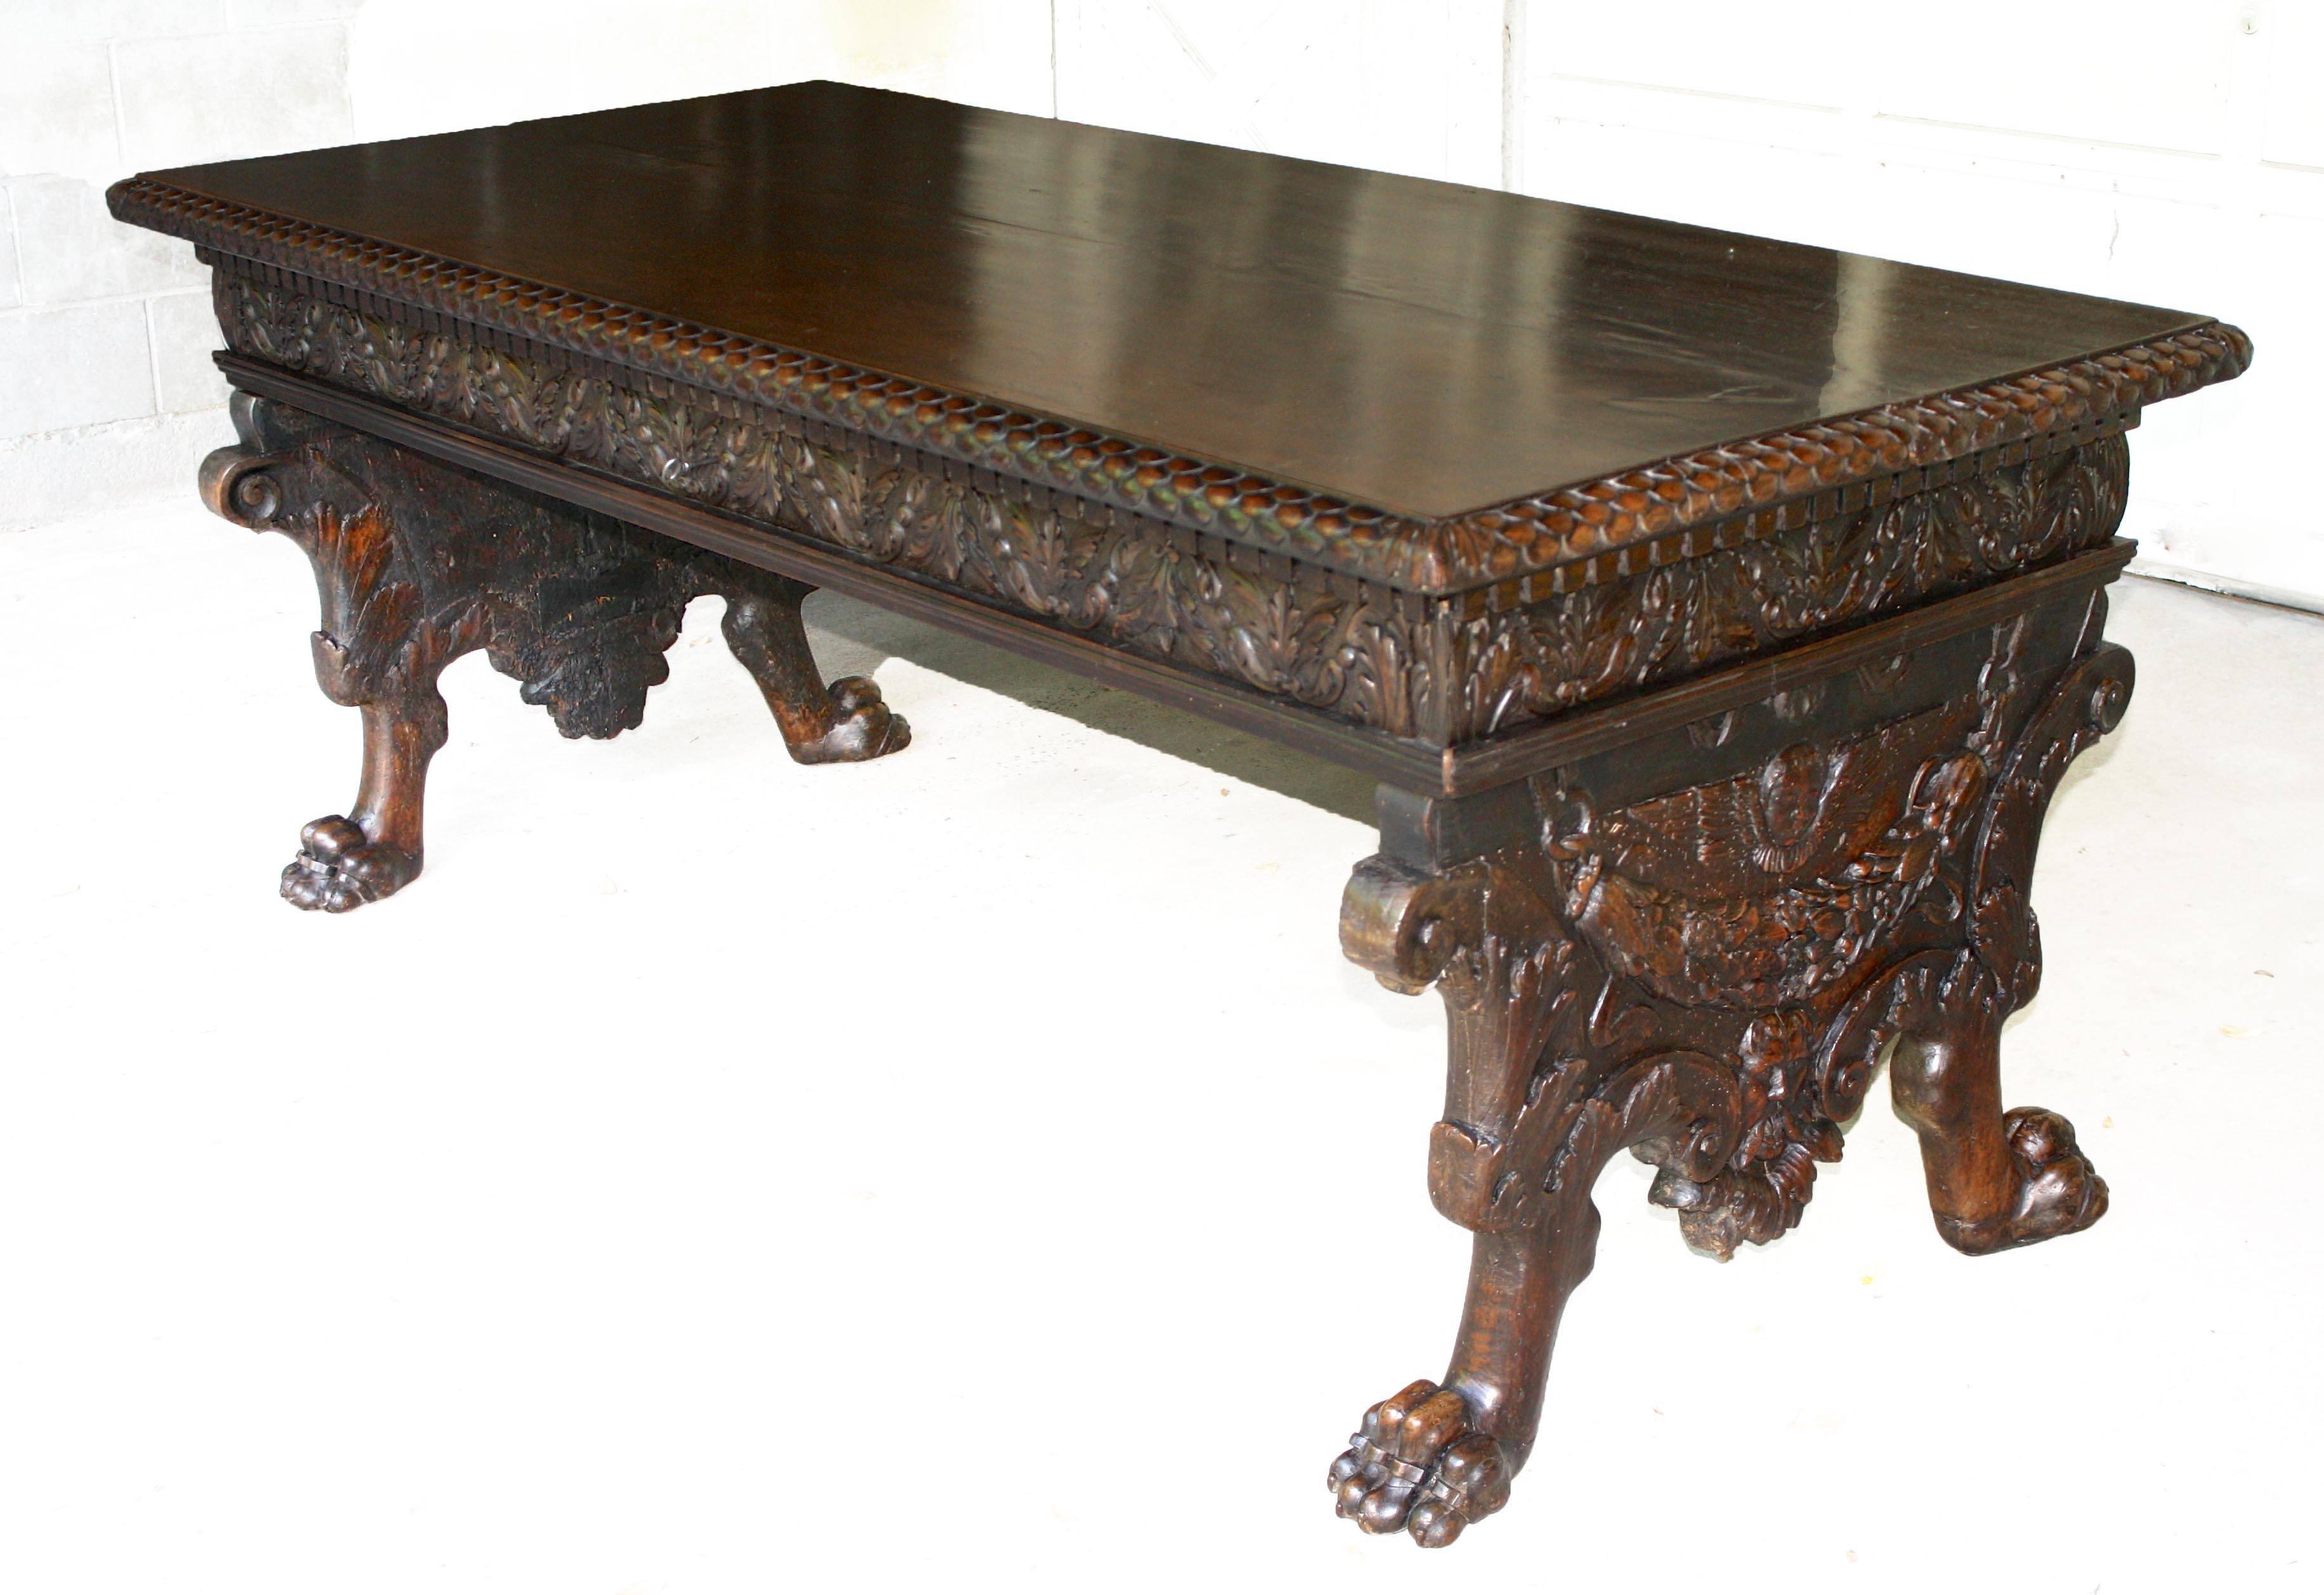 An ornately hand-carved Nord Ovest 'Piedmontese' region Italian artifact, to the ecclesiastical taste.  A long center or console table for placement in a great hall, salon, or as a 'standing desk' in a library.  Detailed trestle-end carvings of